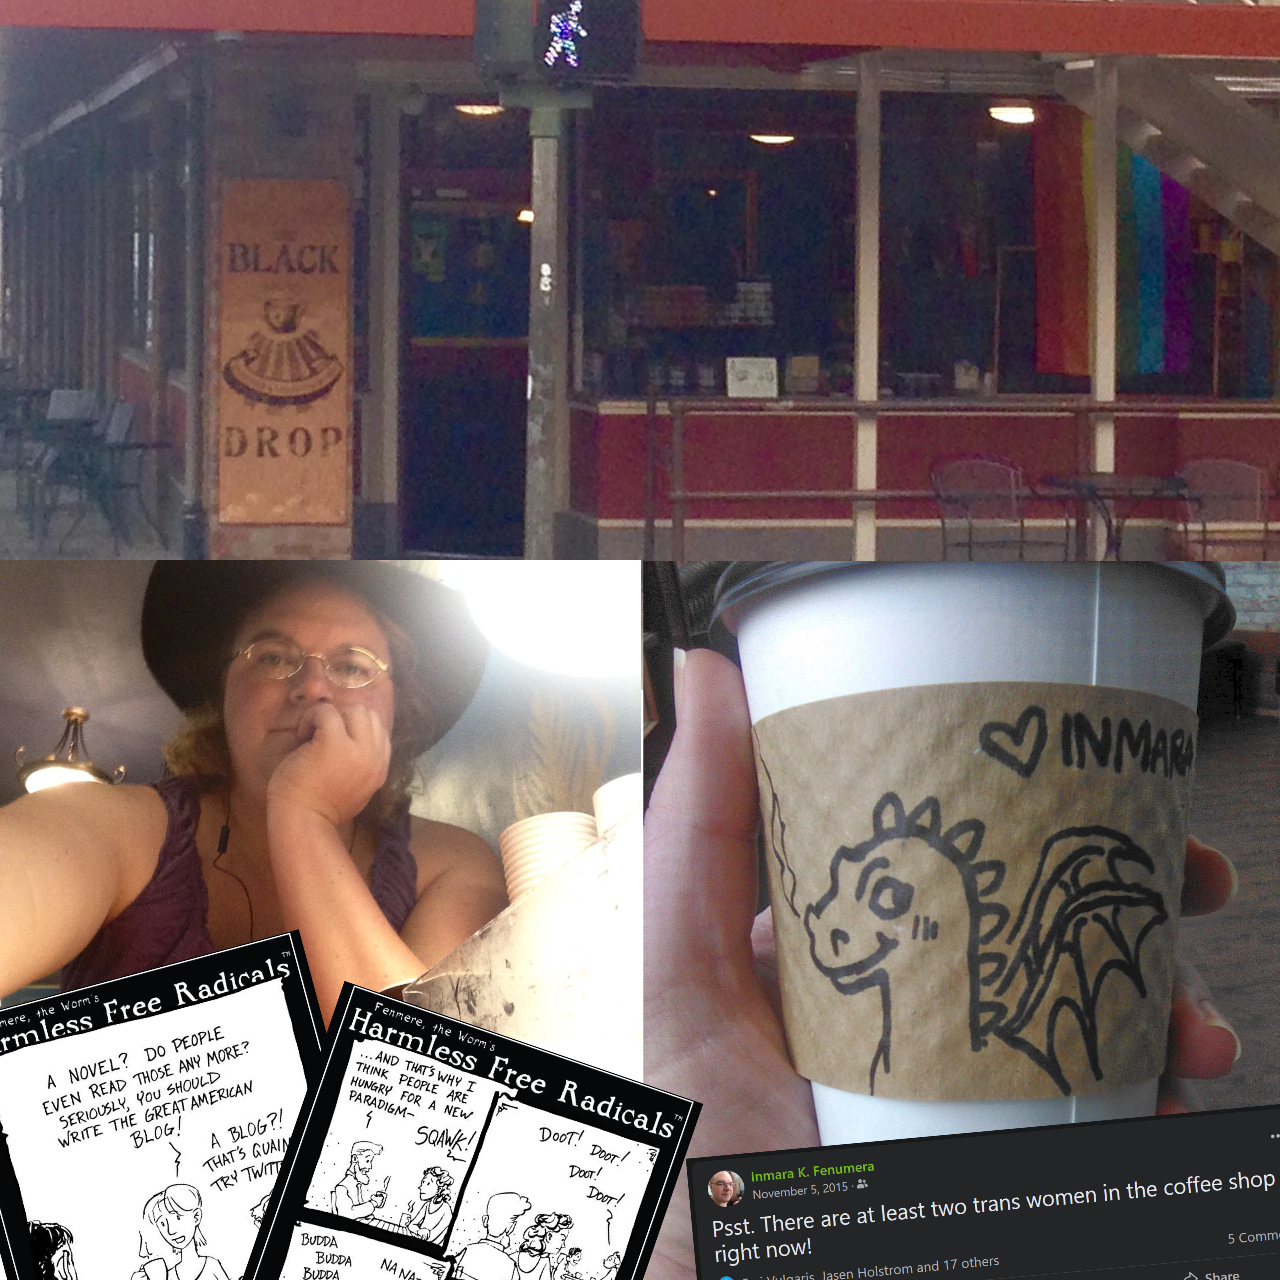 collage of photos related to the Black Drop coffee house and the Inmara's work there